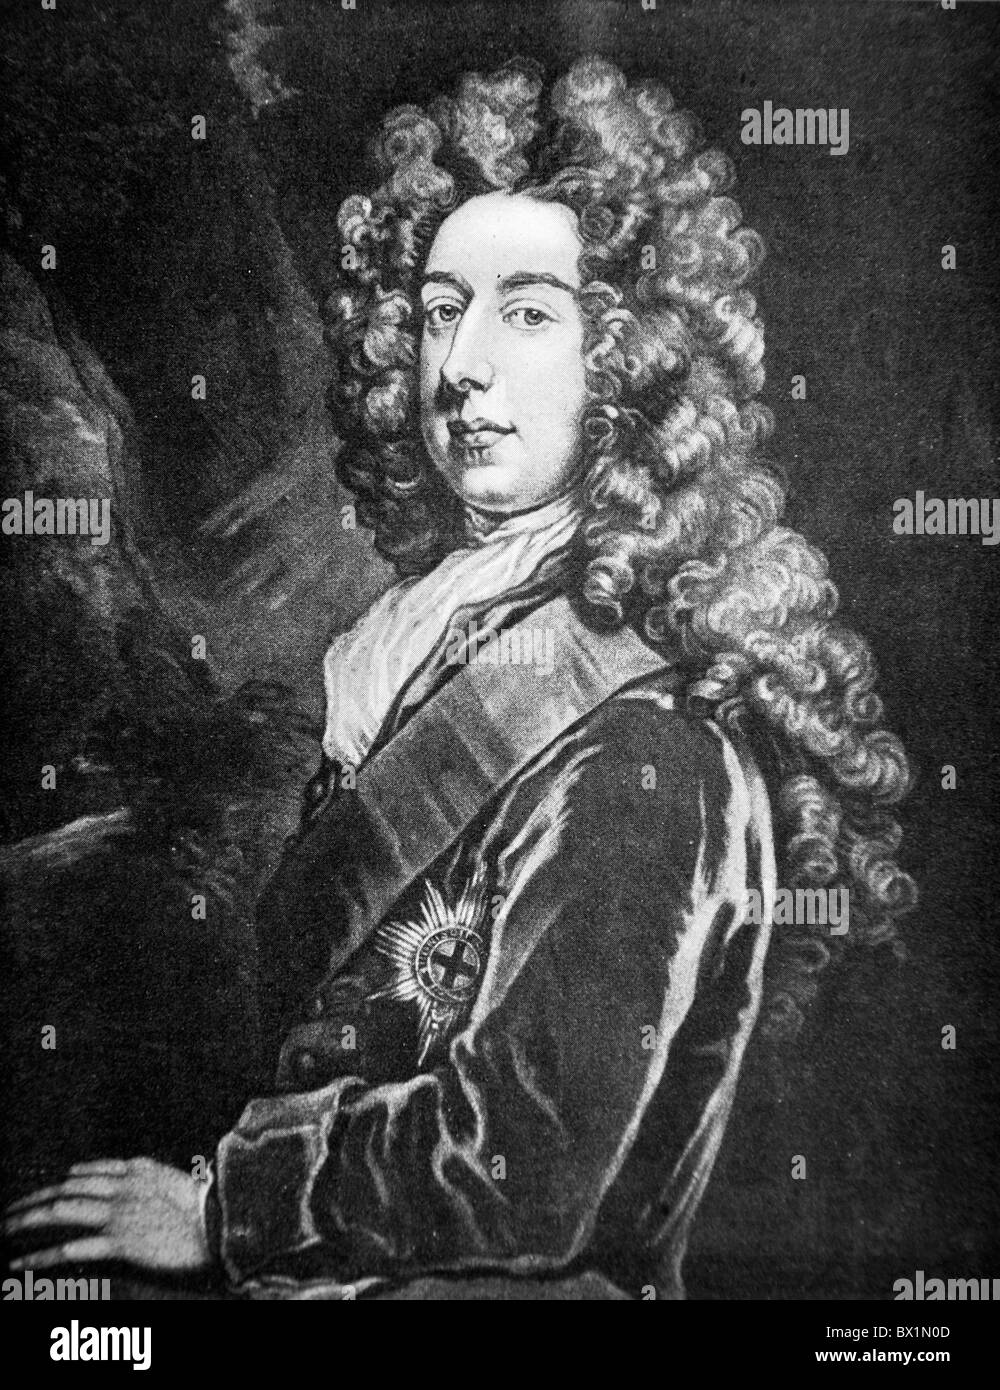 Portrait circa 1722 - 1727 of Spencer Compton, Earl of Wilmington, Prime Minister of Great Britain Stock Photo